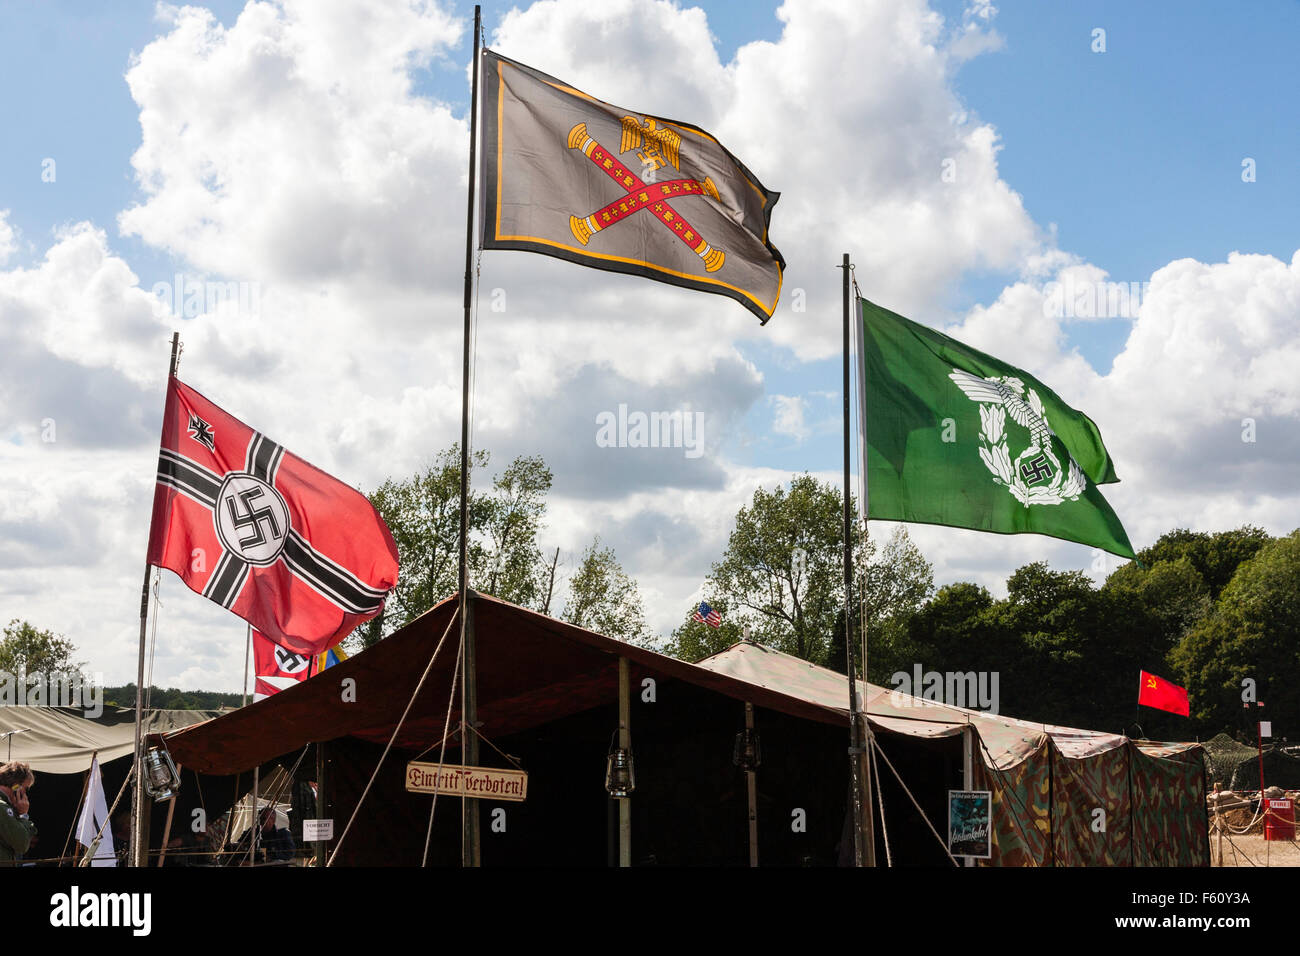 World War Two re-enactment. Third Reich Reihskriegsflagge, battle flag and two German army flags flying above tent. Backlit. Stock Photo